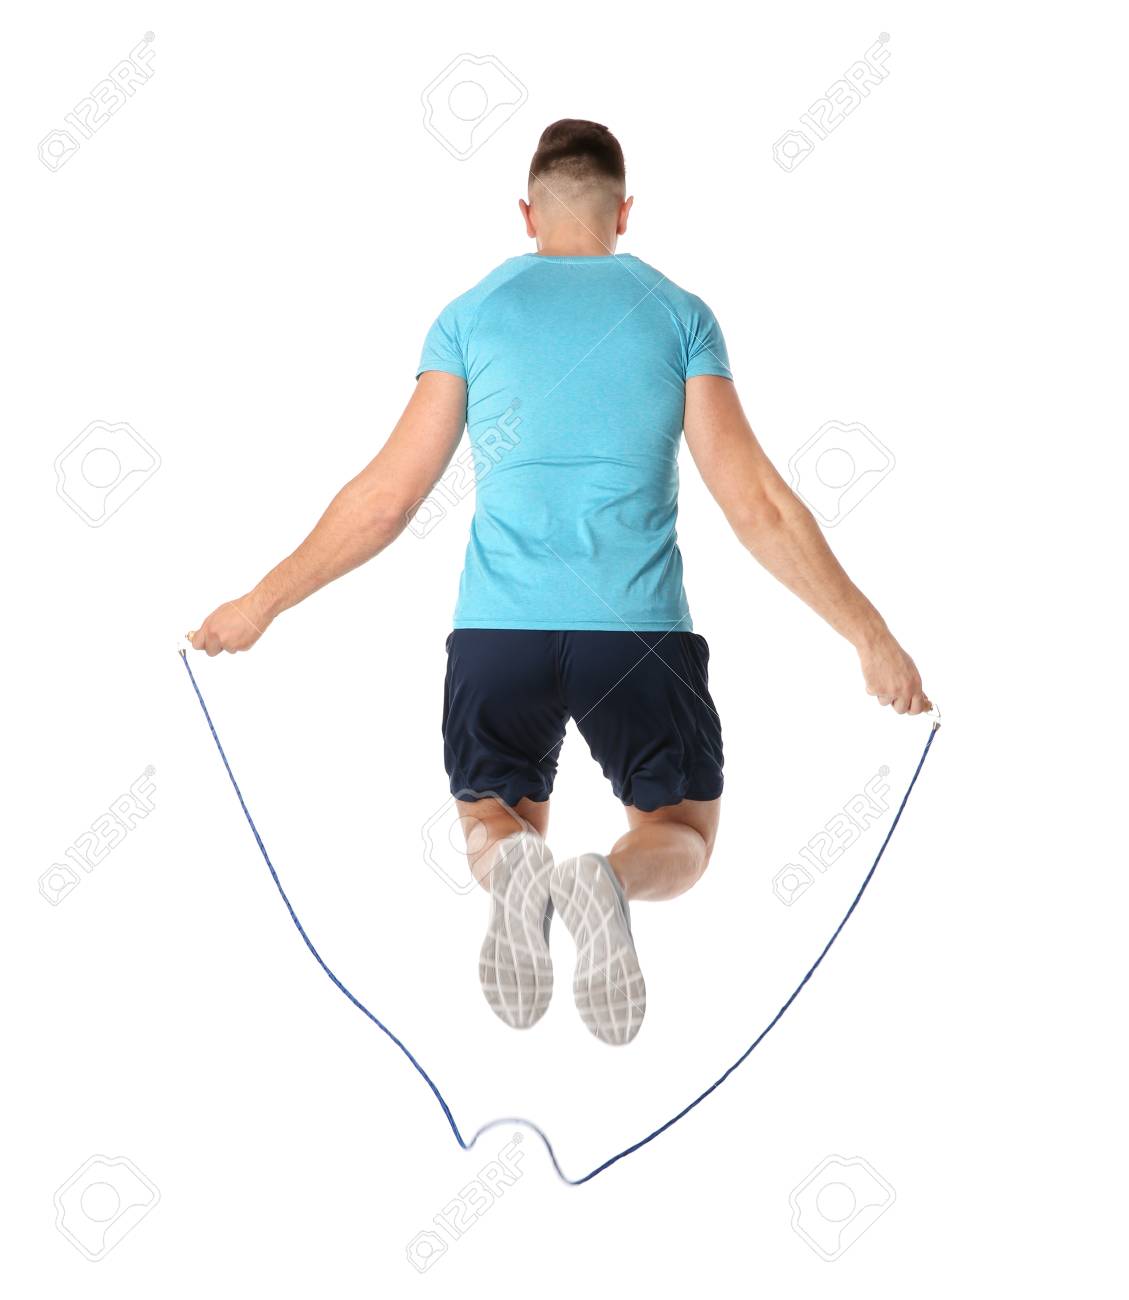 Sportive Man Training With Jump Rope On White Background Stock